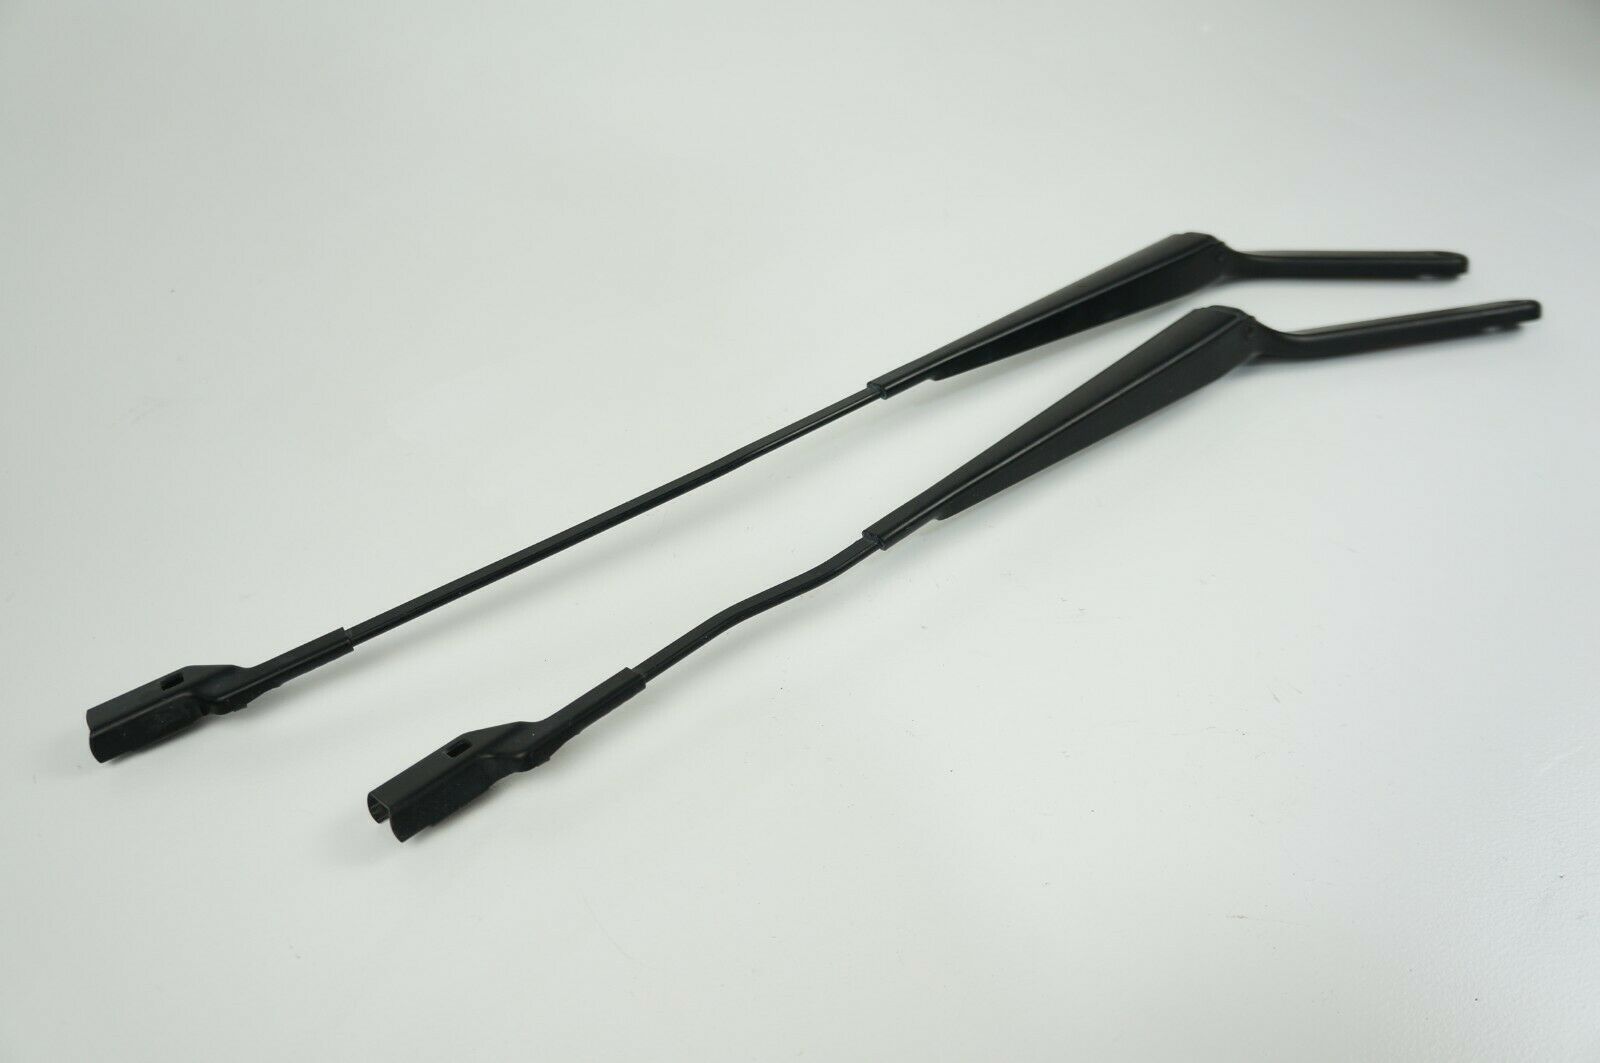 Primary image for 2007-2013 bmw e70 x5 front right left windshield wiper arm arms pair black